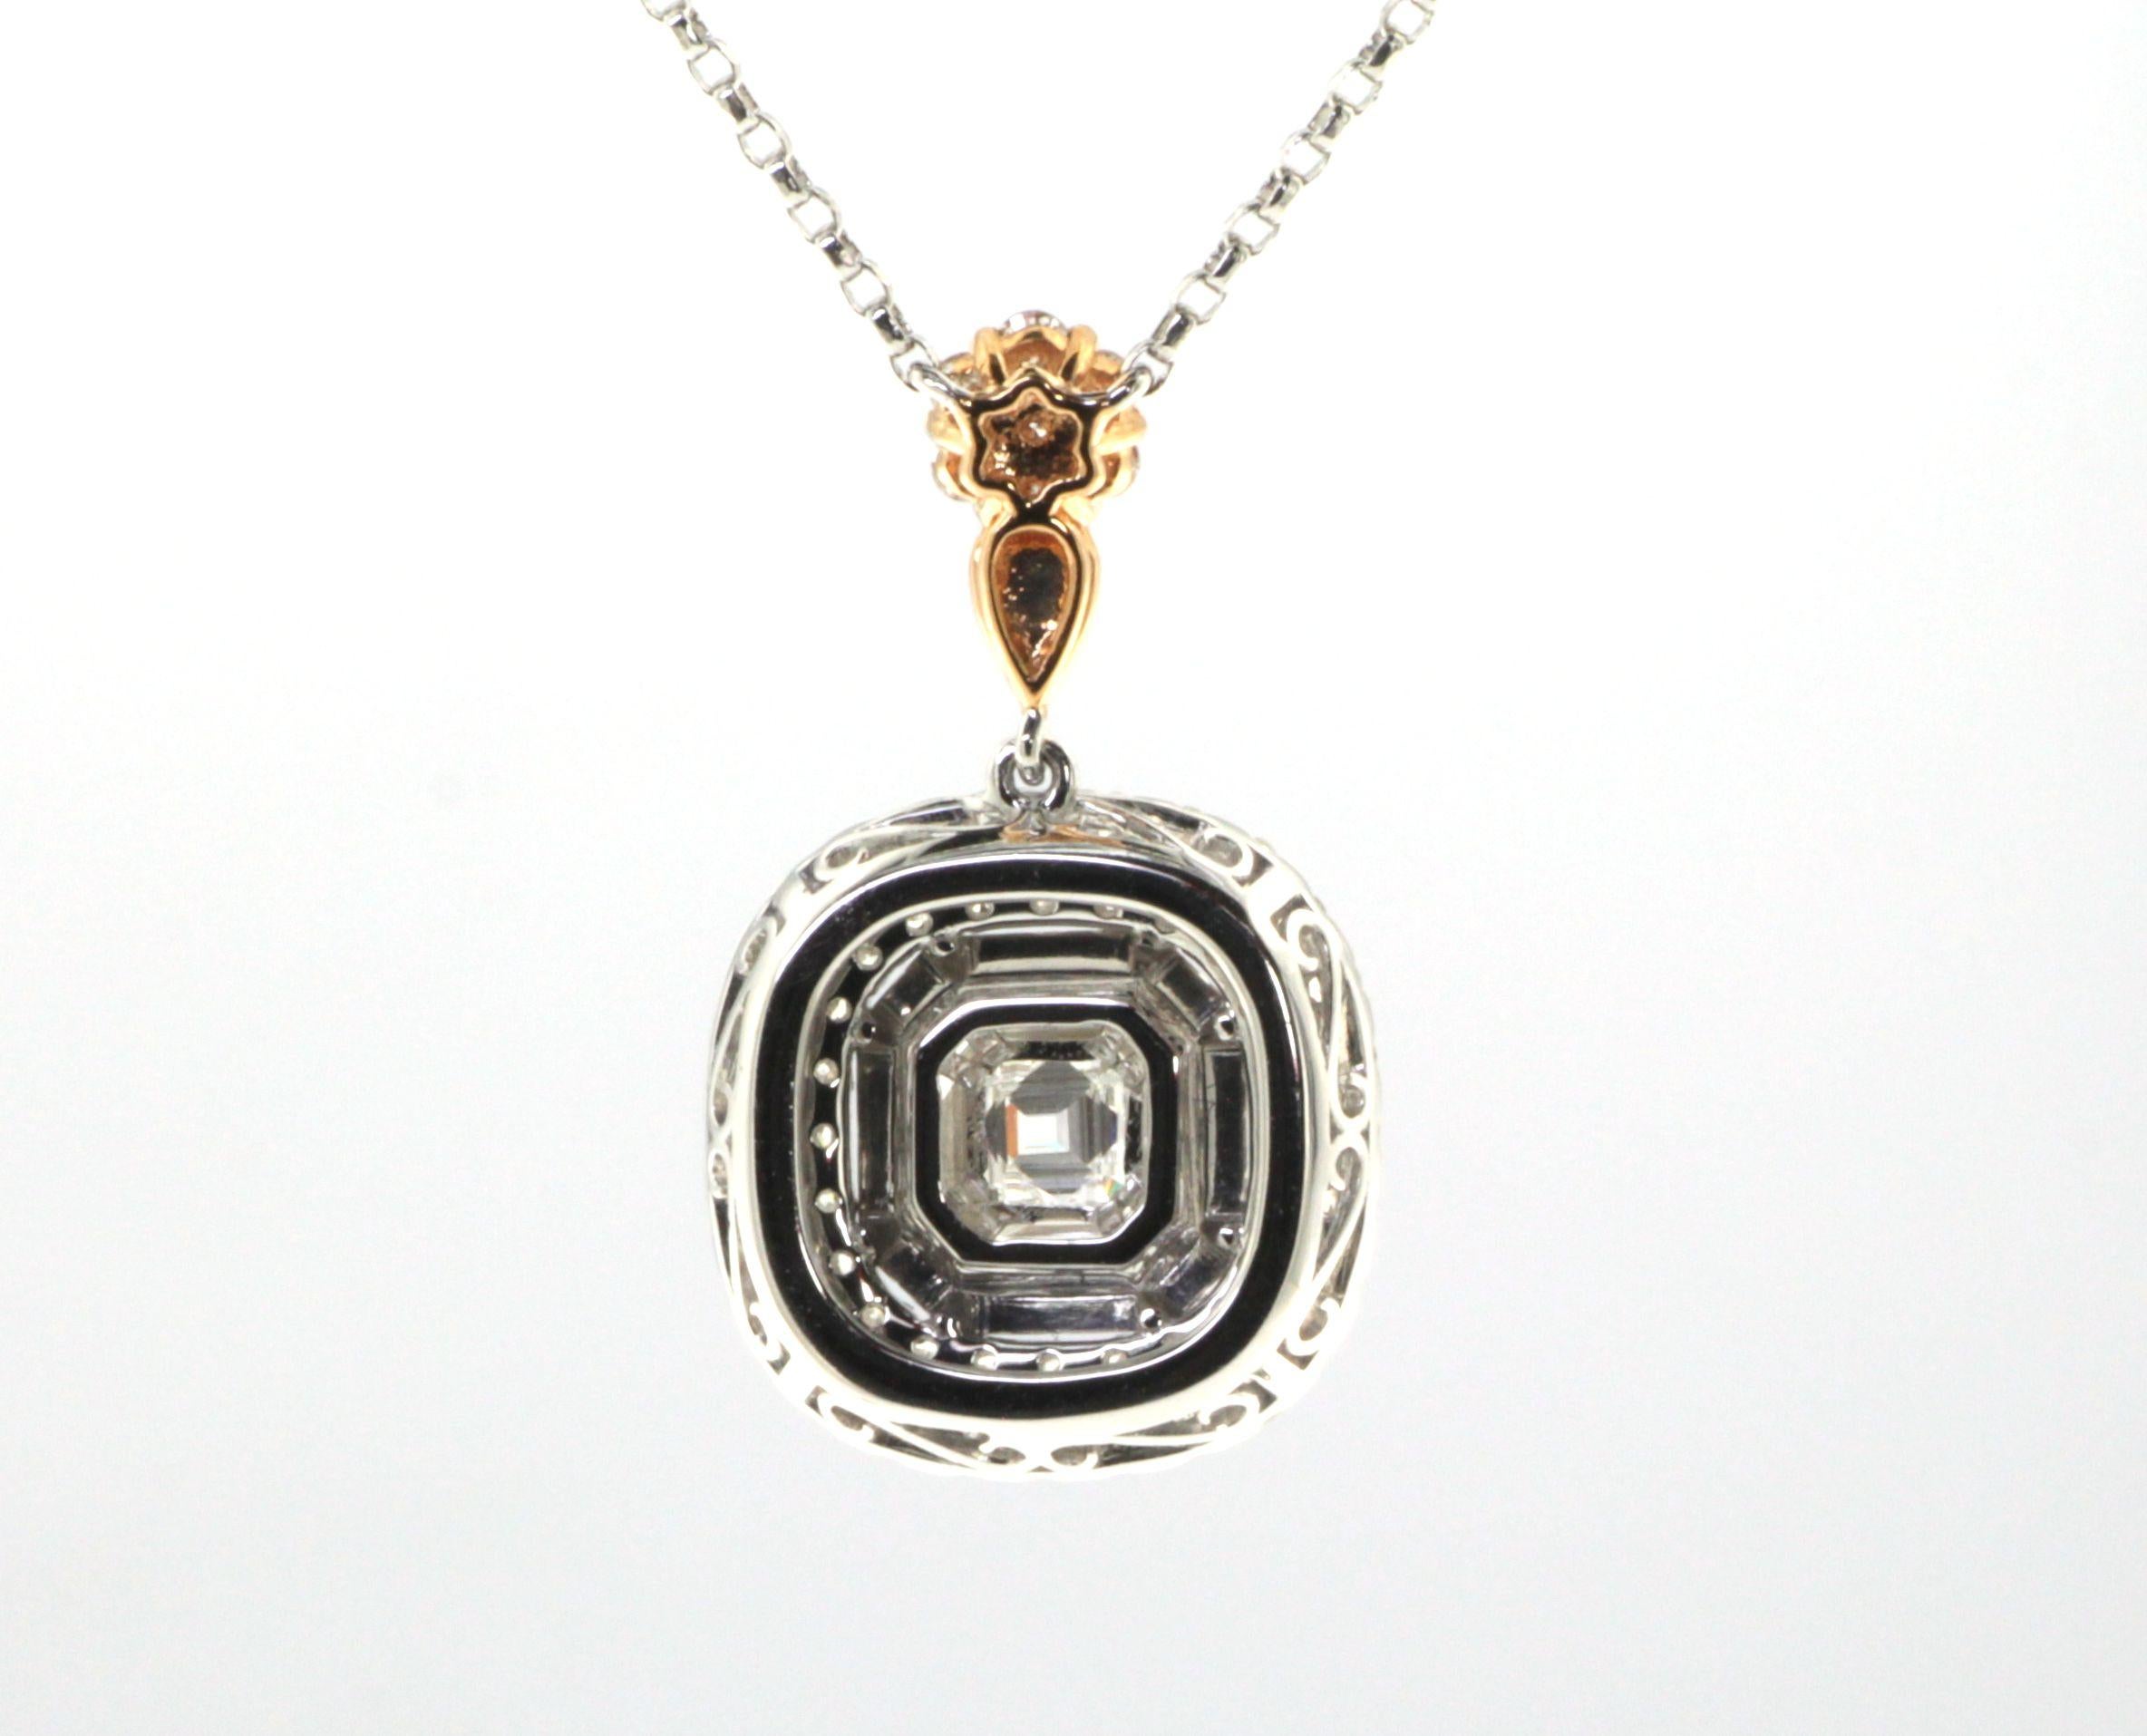 This pendant features 0.77 carat illusion setting diamond pie in the center. The diamond pie is set into two diamond halos totaling 0.60 carat. Pendant is set in 18 karat rose and white gold. The chain length is 16 inch. Pendant Dimension is 0.55